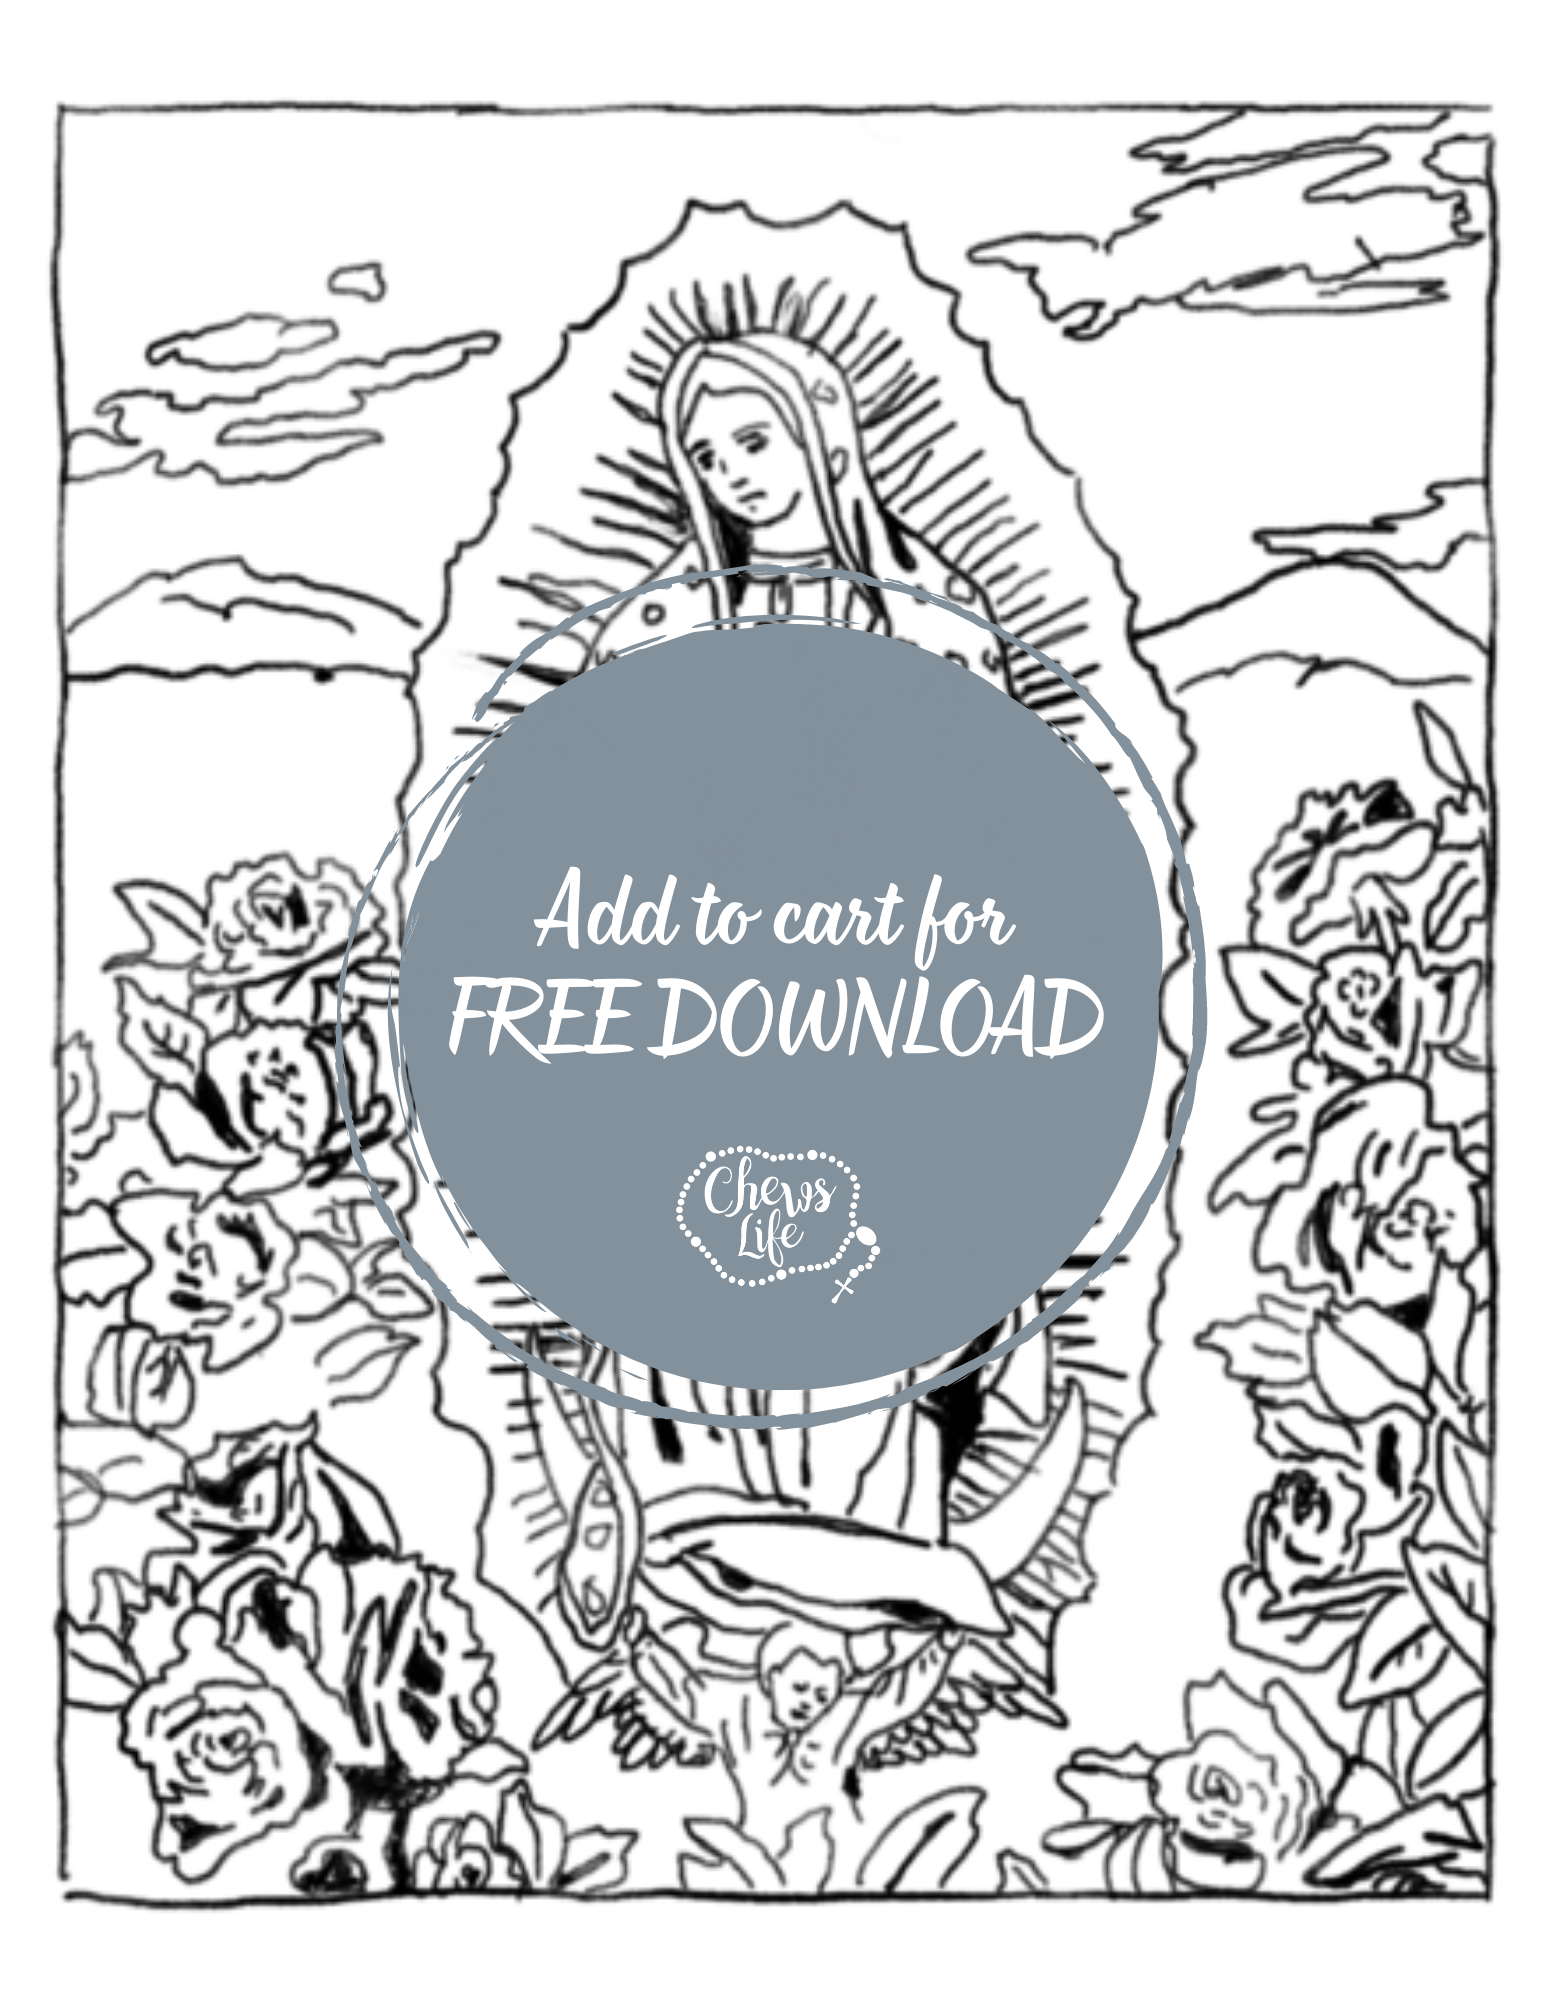 Our lady of guadalupe coloring page chews life